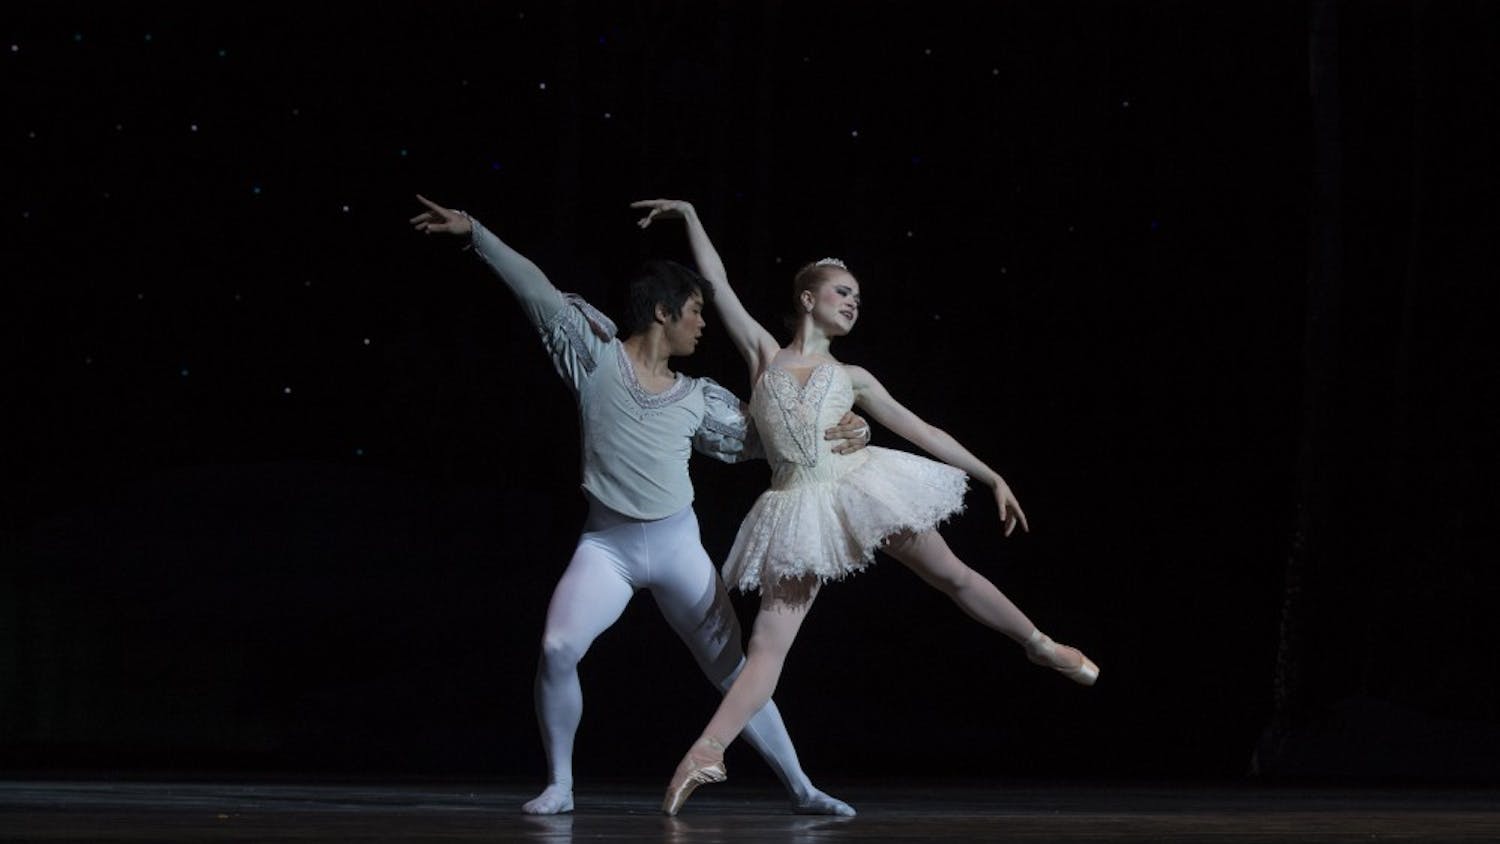 Students Anna Grunewald and Darren Hsu dance as the Snow Queen and the Snow Cavalier on Nov. 28 in the first act of "The Nutcracker". The spring season at the Musical Arts Center has many performances to come.